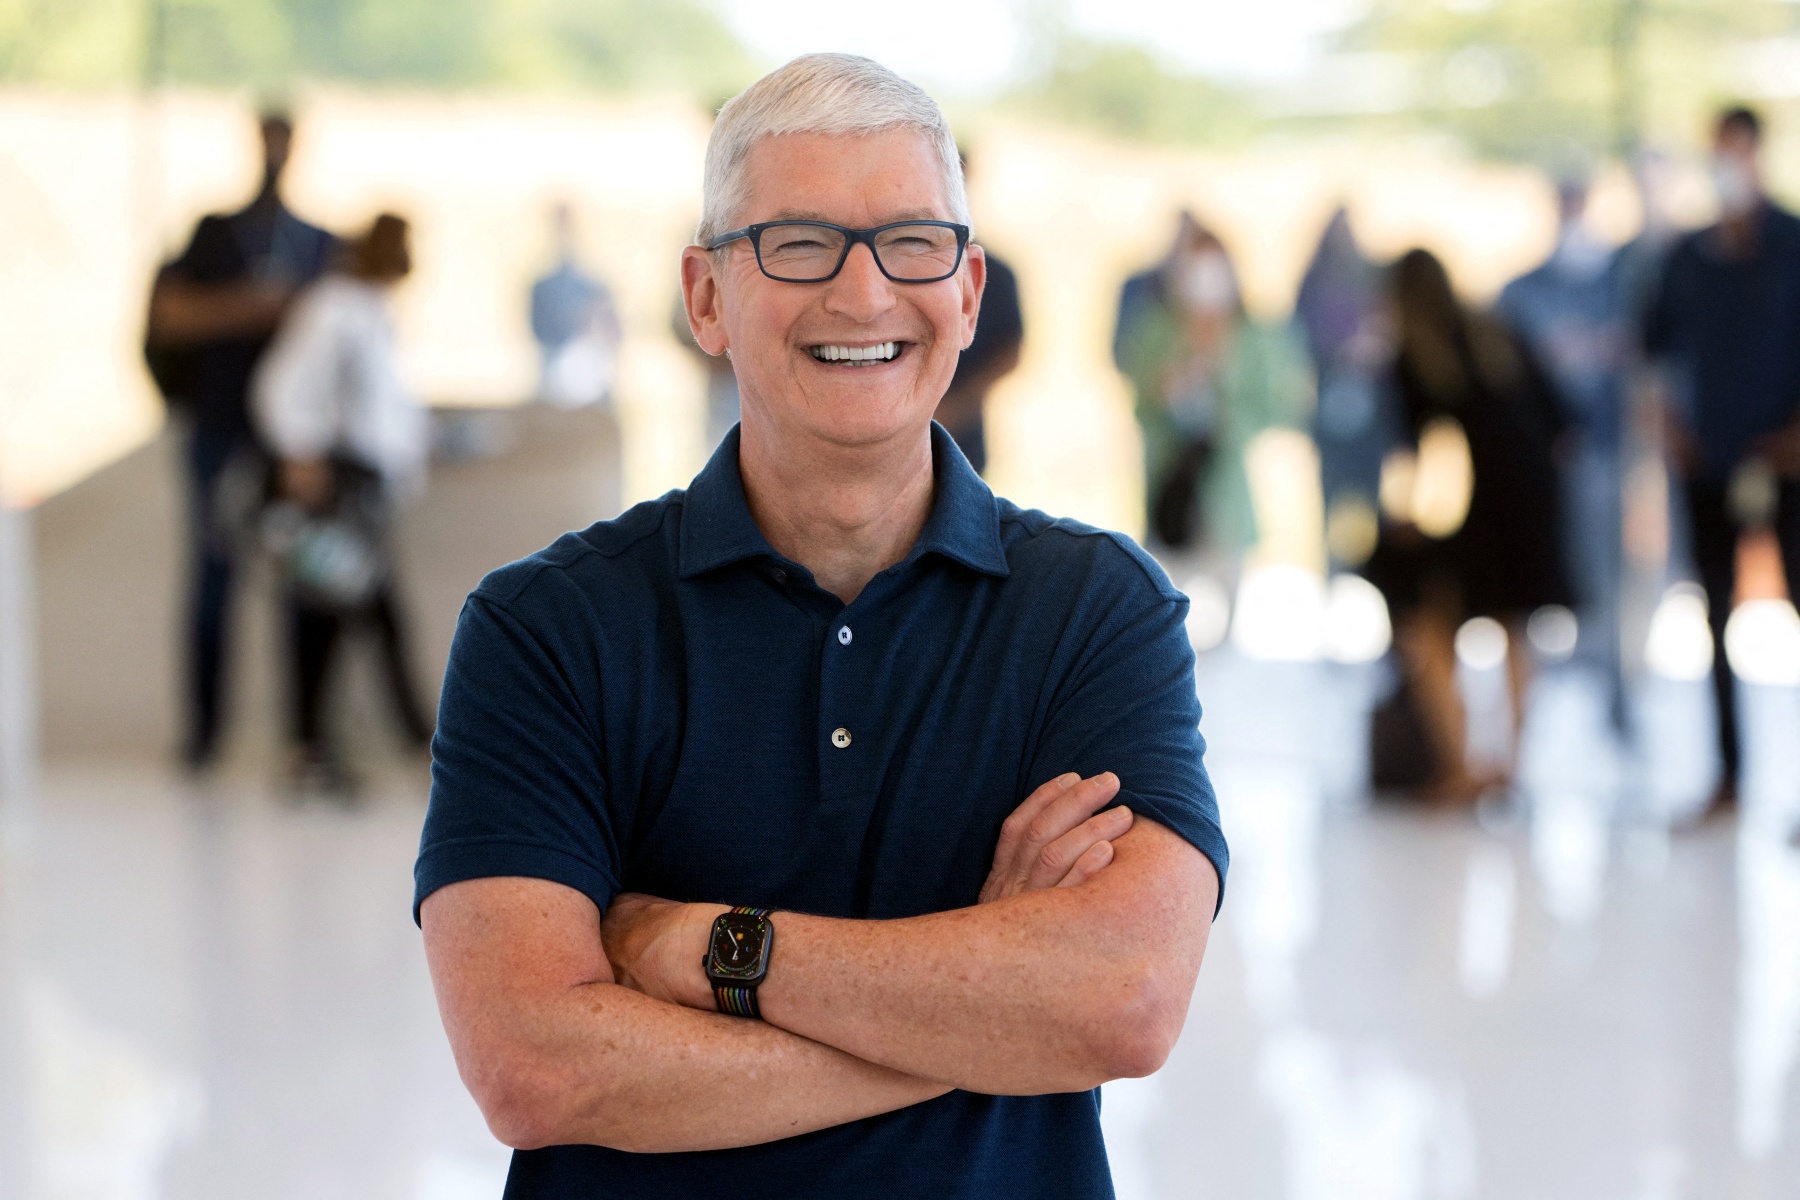 Here's your chance to land your dream internship at Apple